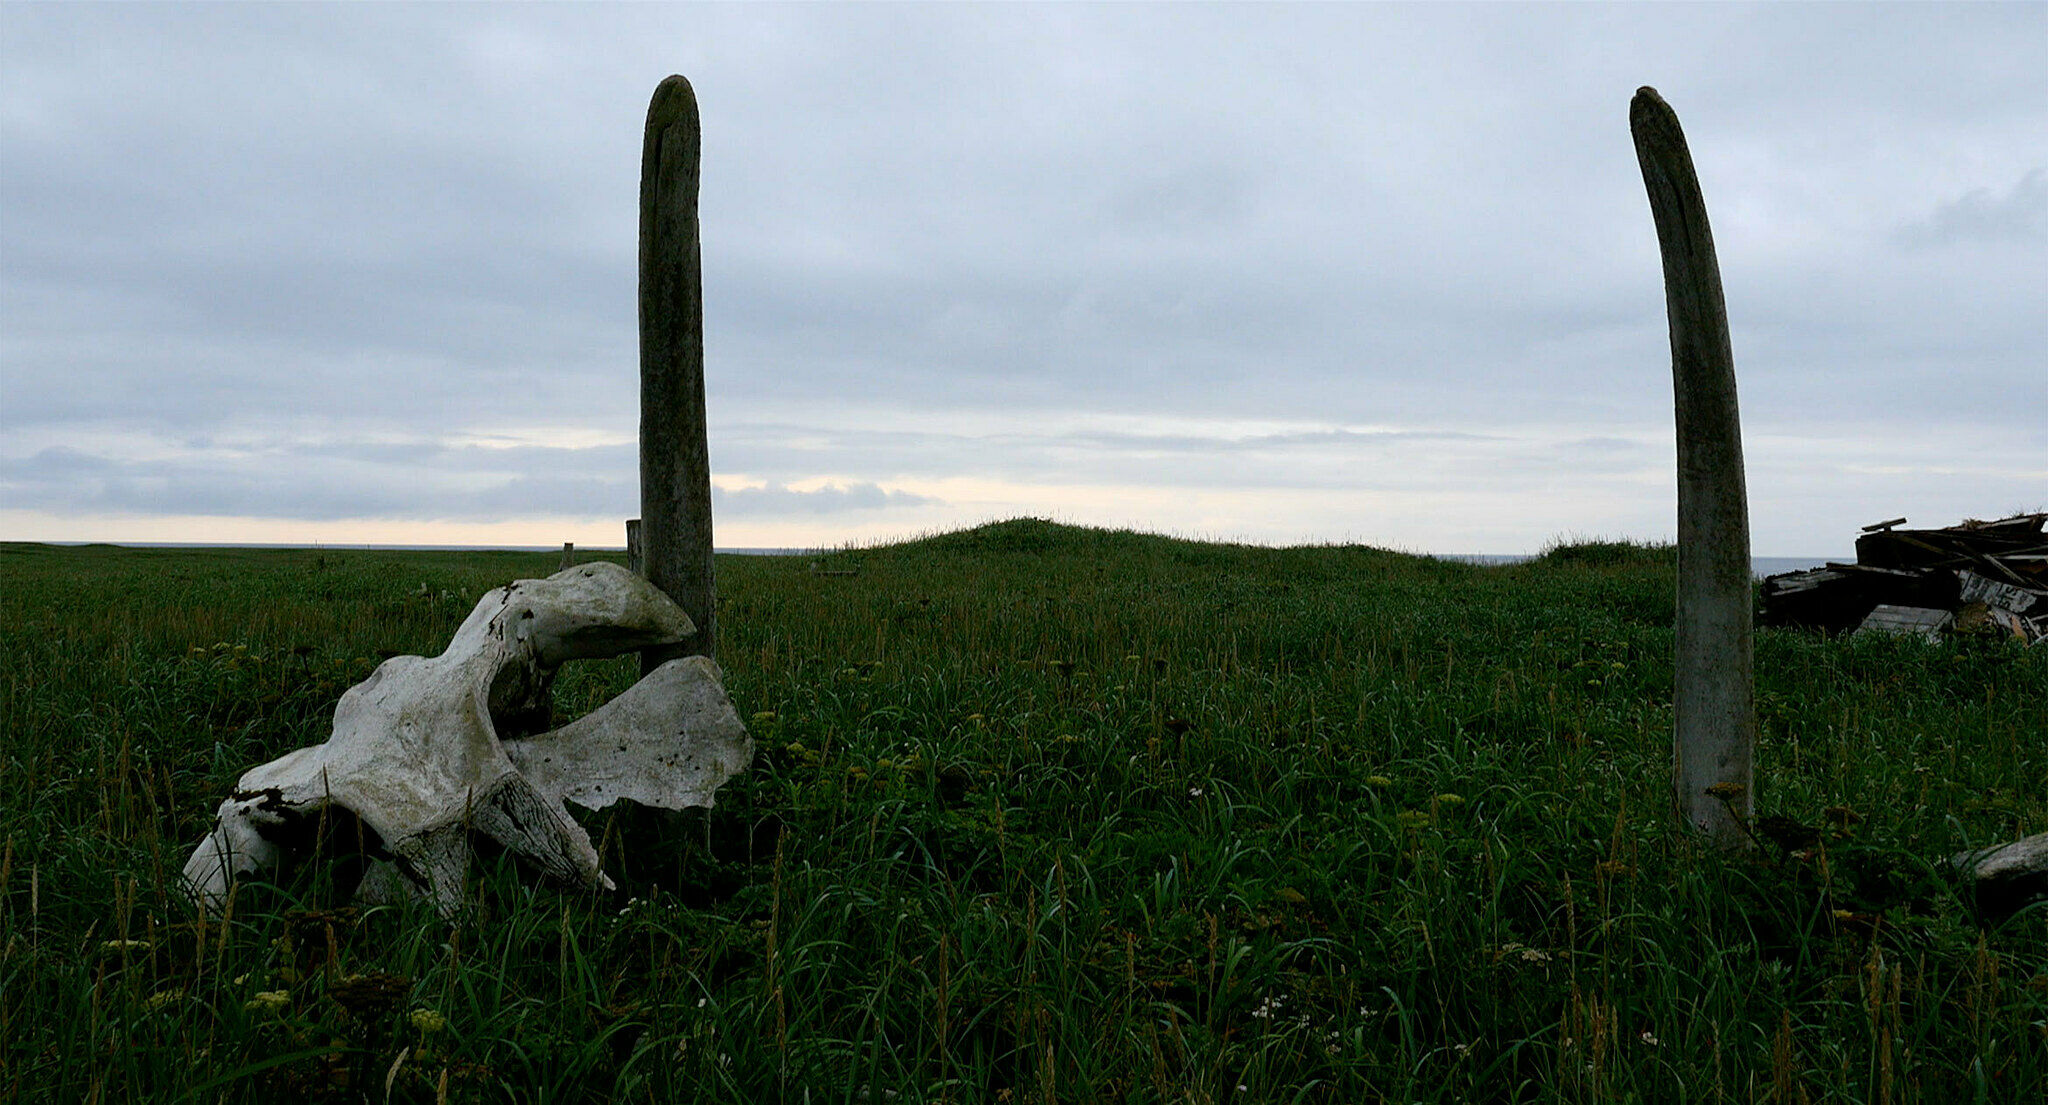 Still from digital video by Sky Hopinka. Image depicts grassy field with two cacti and an animal skull